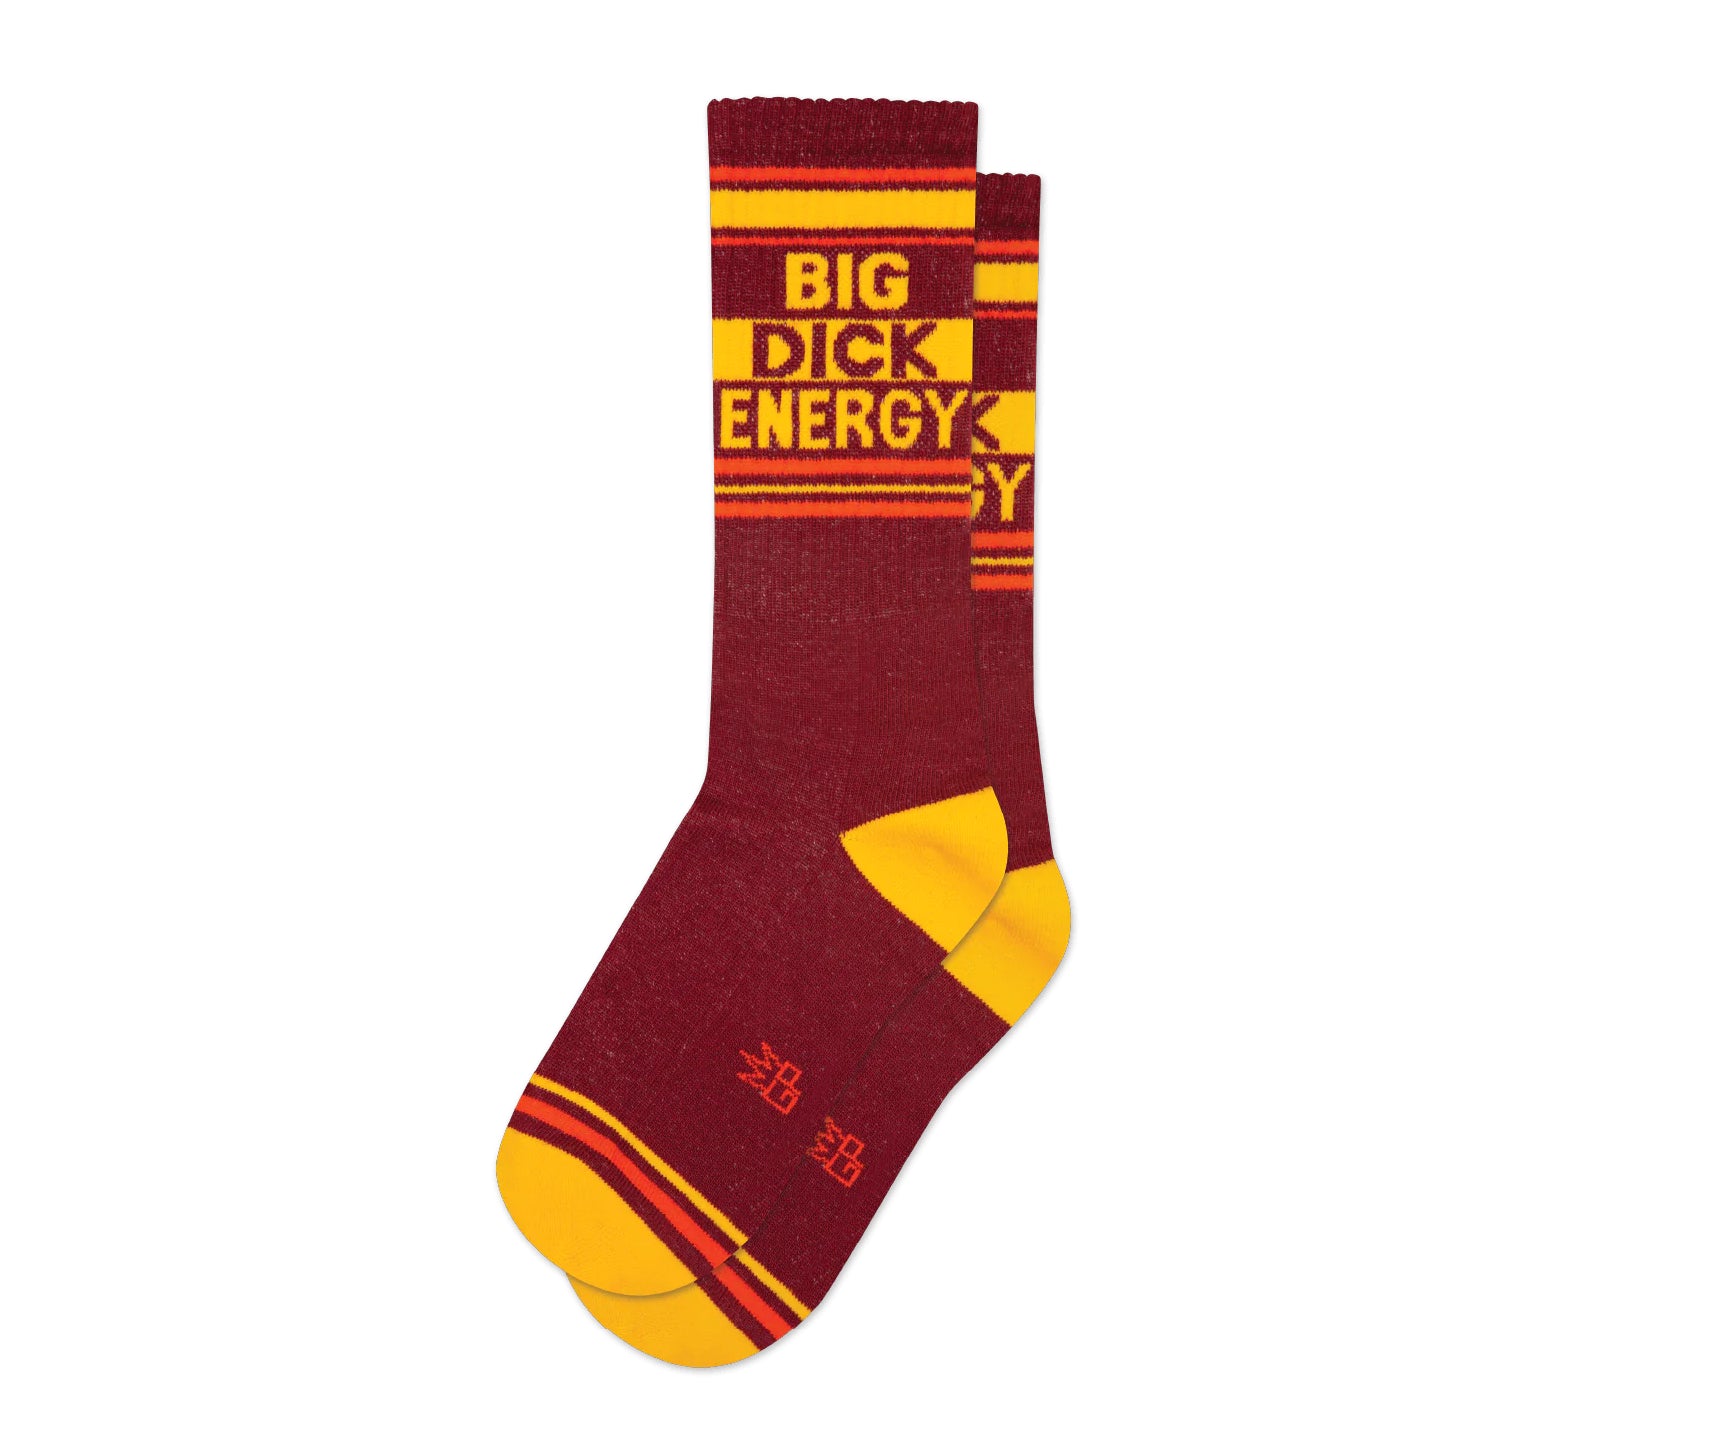 A pair of burgundy and yellow crew socks that read "Big Dick Energy" with the Gumball Poodle logo along the arch.